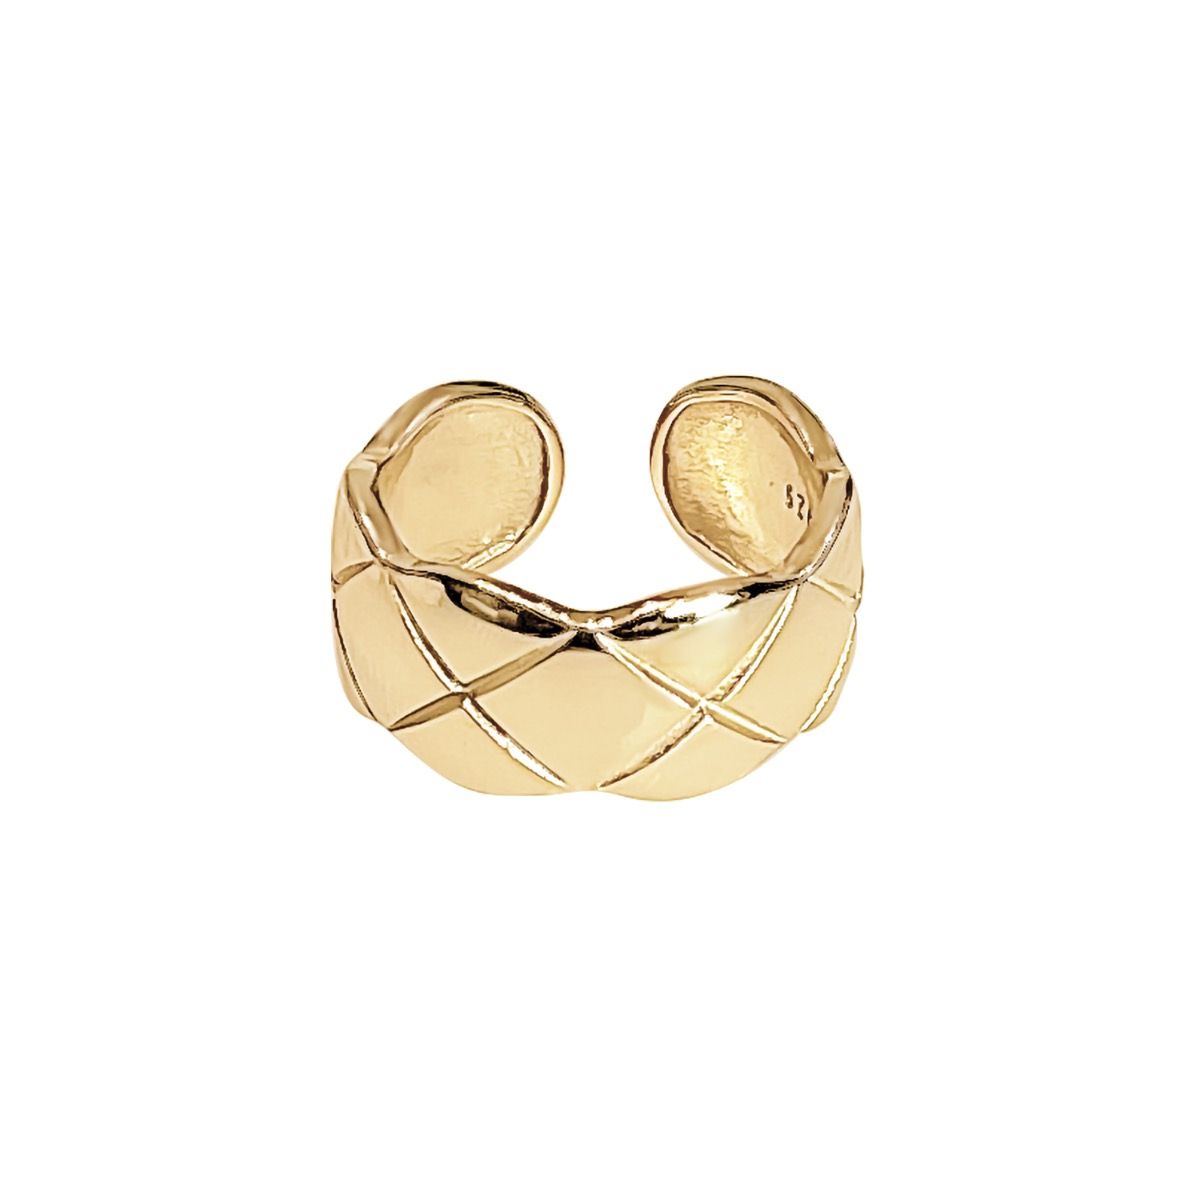 Adjustable Shallow Ring in Gold